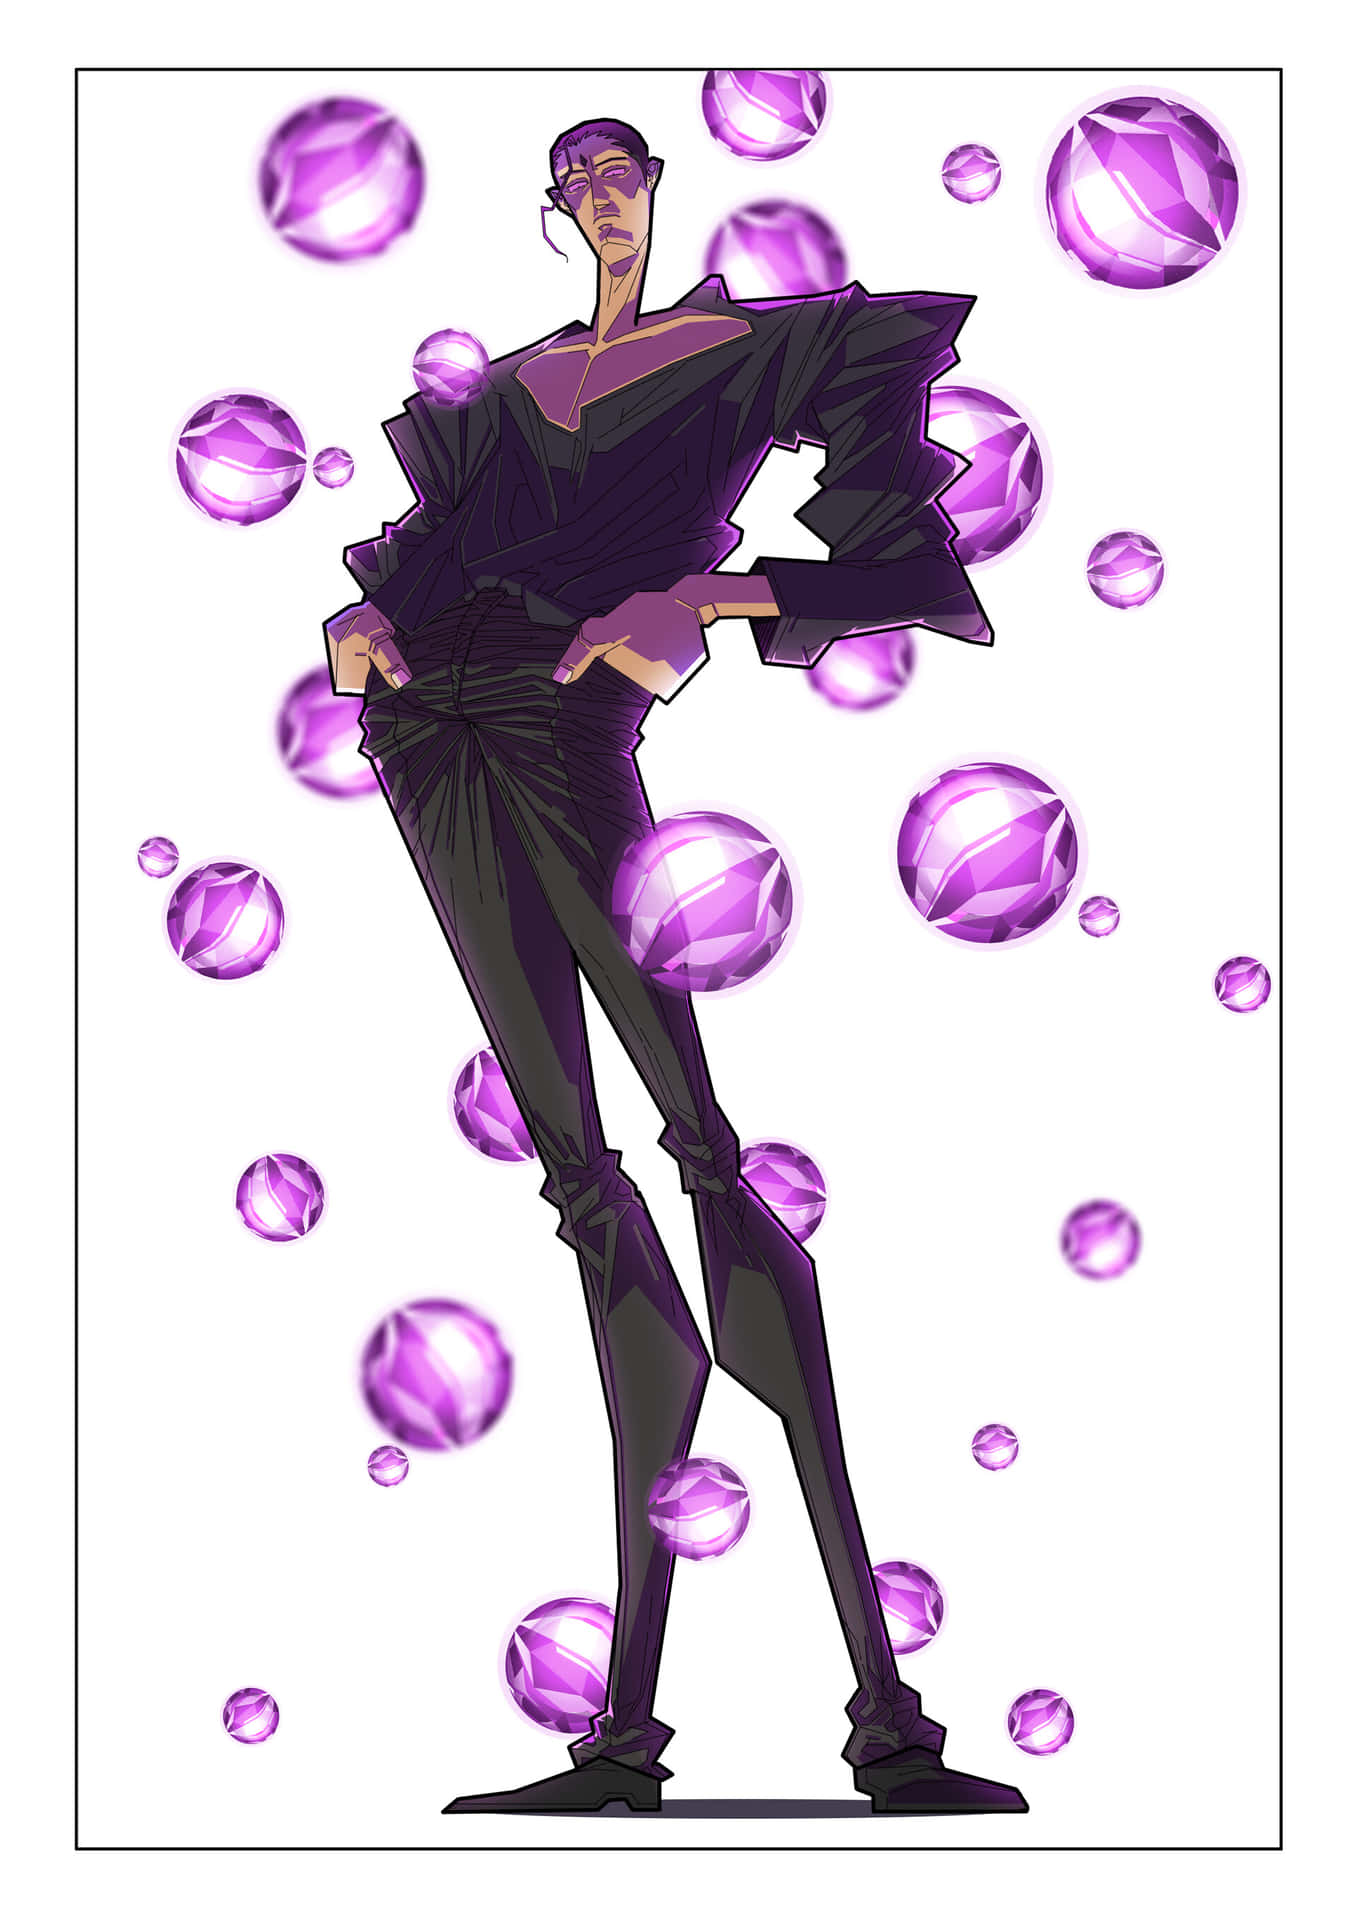 Stylish Anime Characterwith Purple Crystals Wallpaper